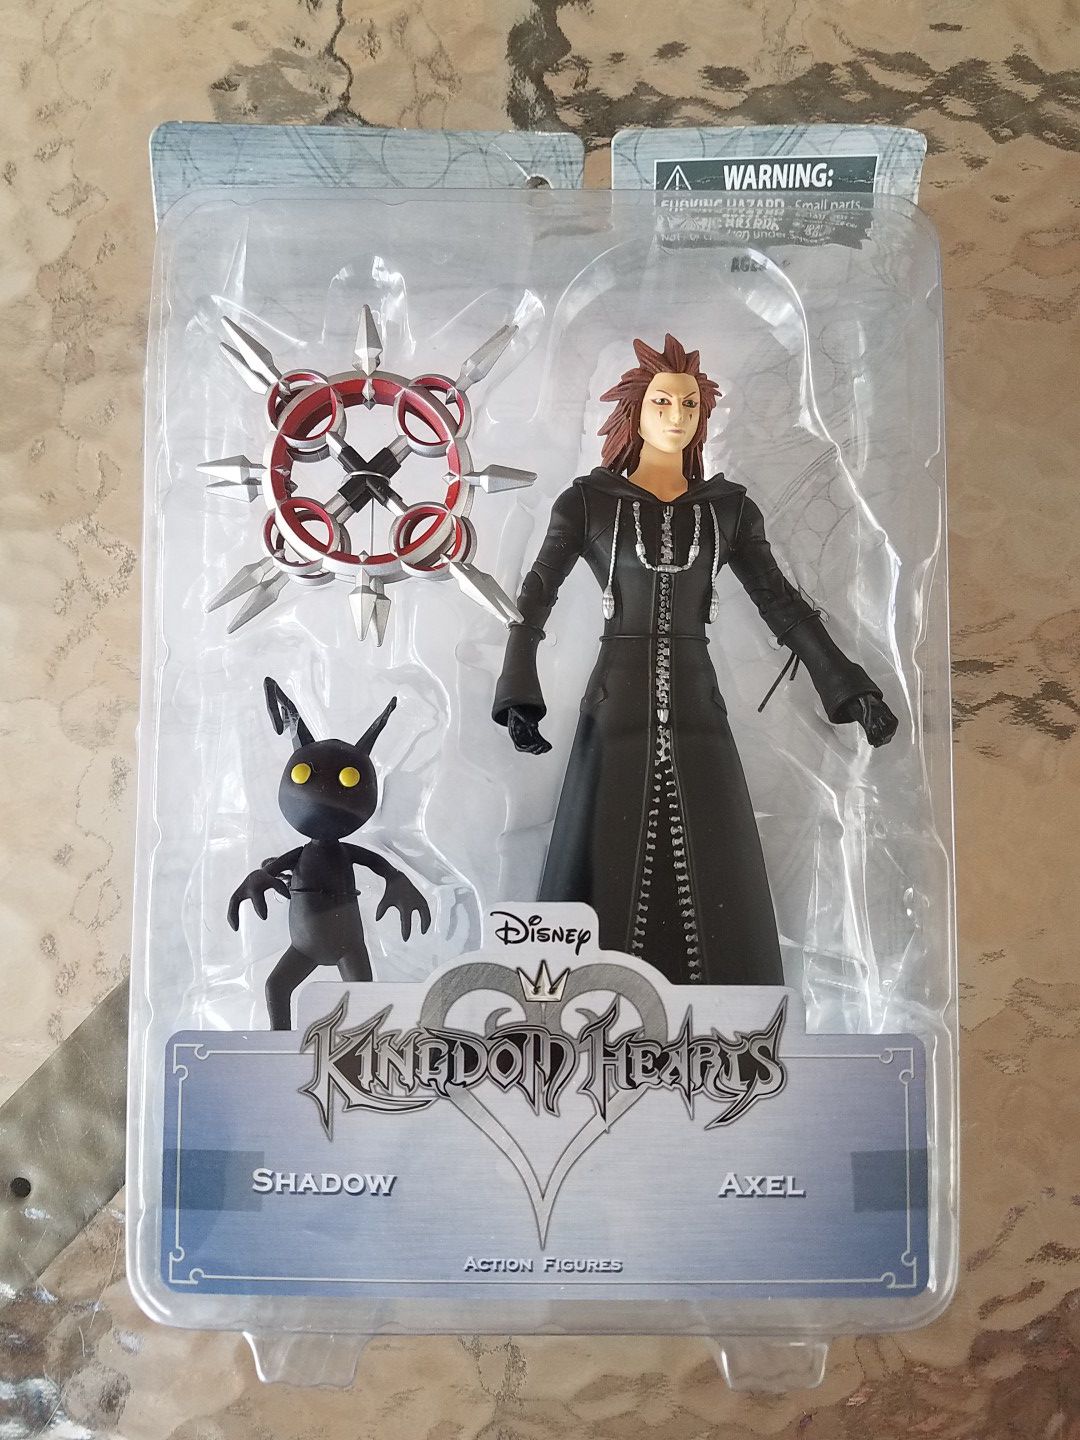 Kingdom Hearts Set of 2 Figures - Shadow & Axel made by Diamond Toys - New / Unopened